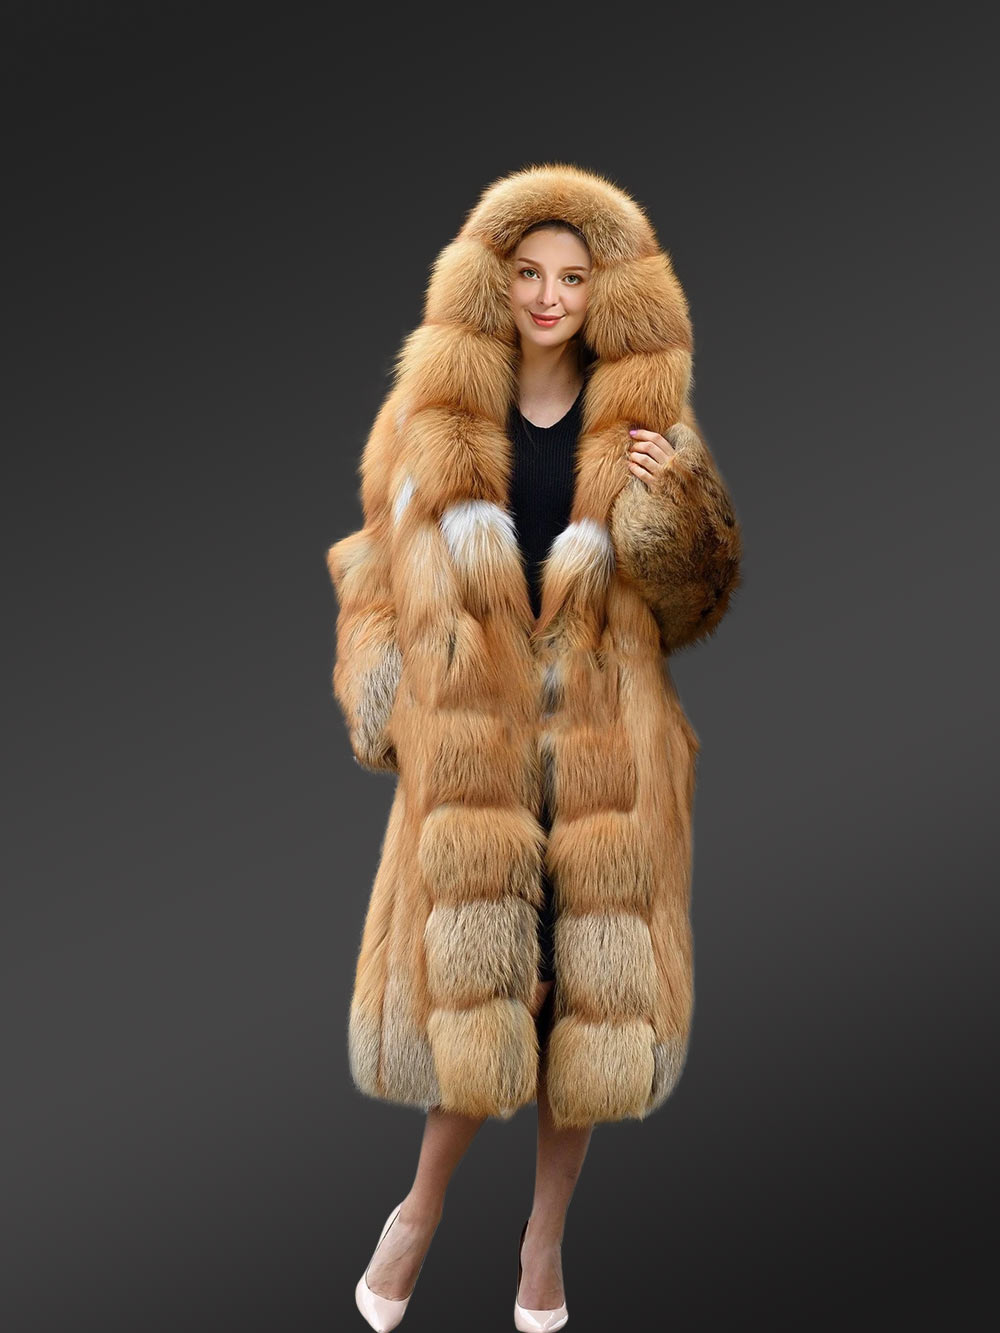 Luxury Gold Fox Fur Jacket for Women Is Elegant, Soft and Warm